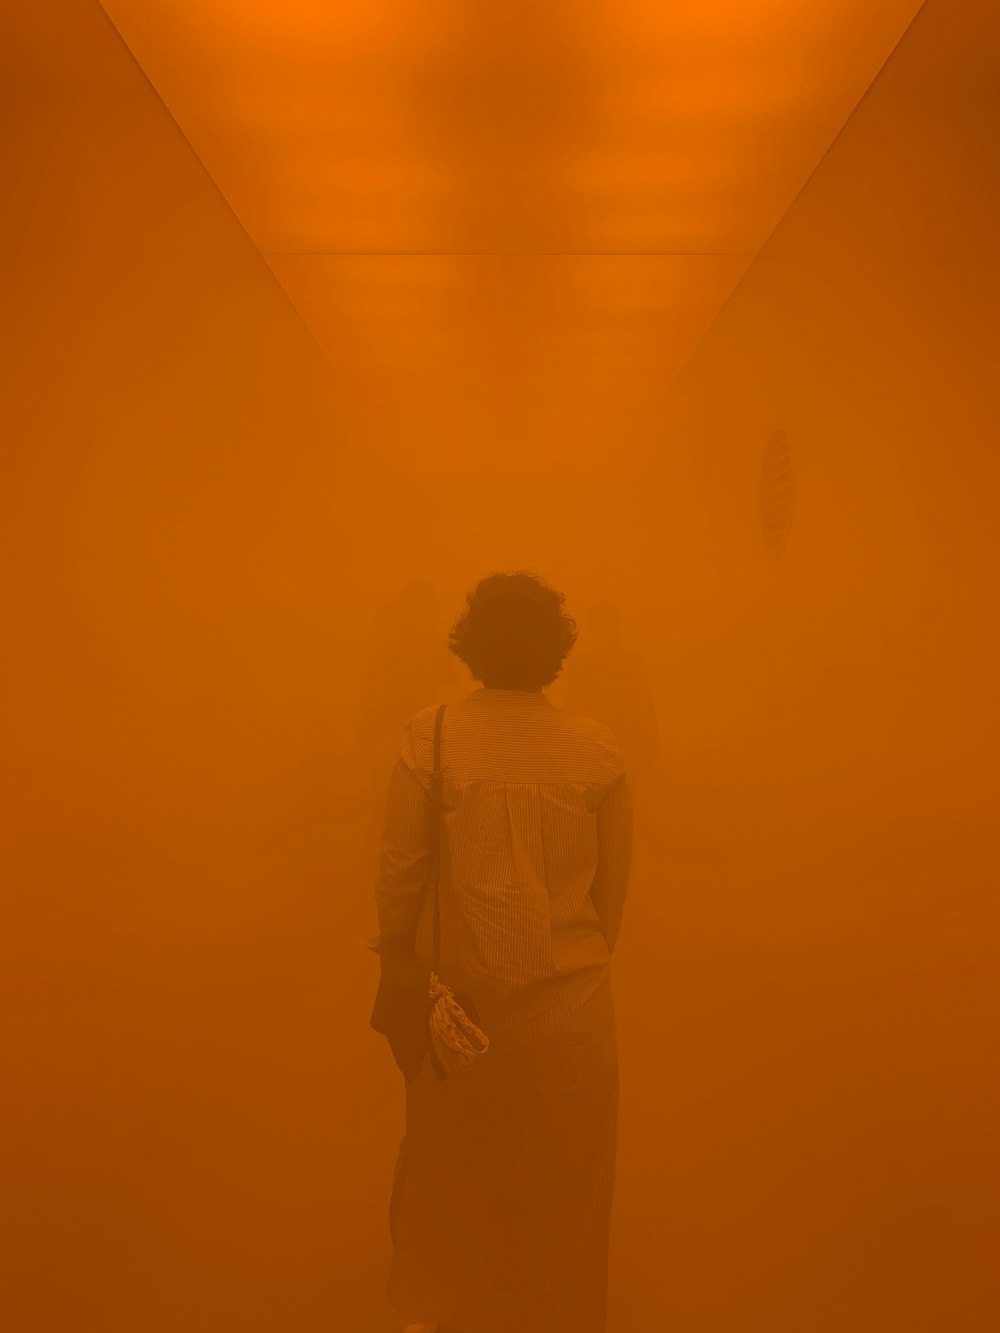 blurry photography of person inside an orange room